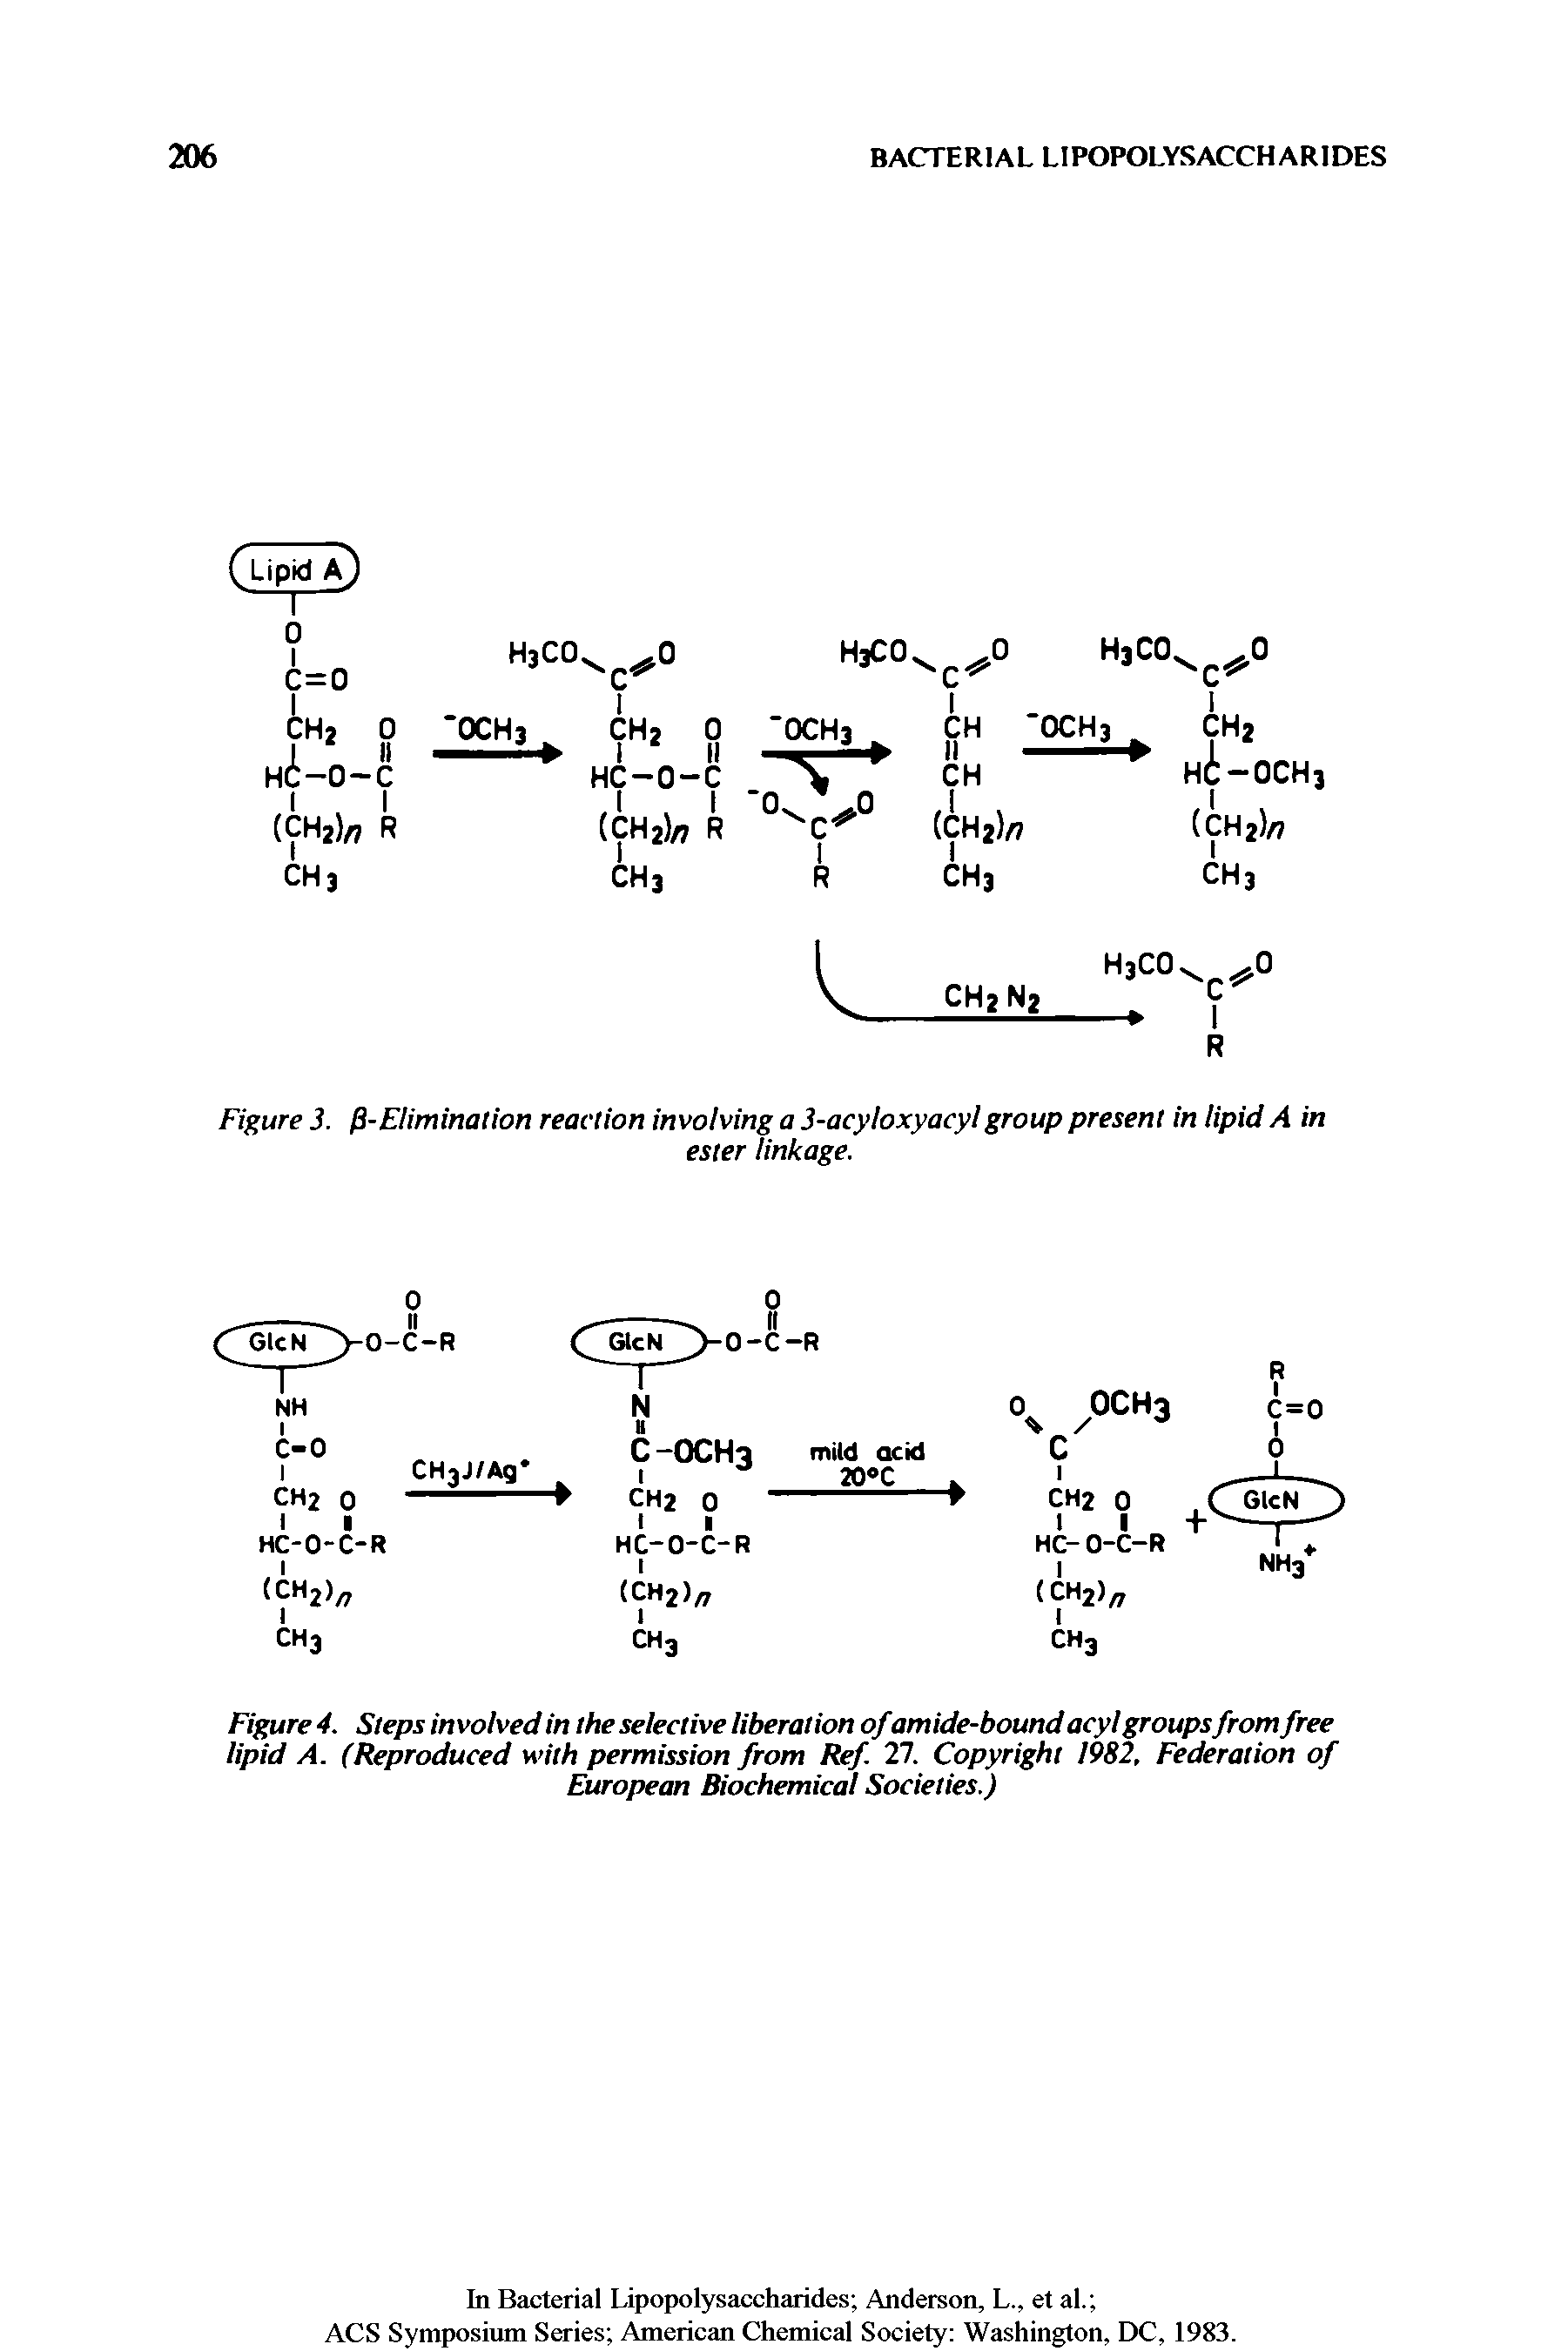 Figure 4. Steps involved in the selective liberation ofamide-bound acyl groupsfrom free lipid A. (Reproduced with permission from Ref 27. Copyright 1982, Federation of European Biochemical Societies.)...